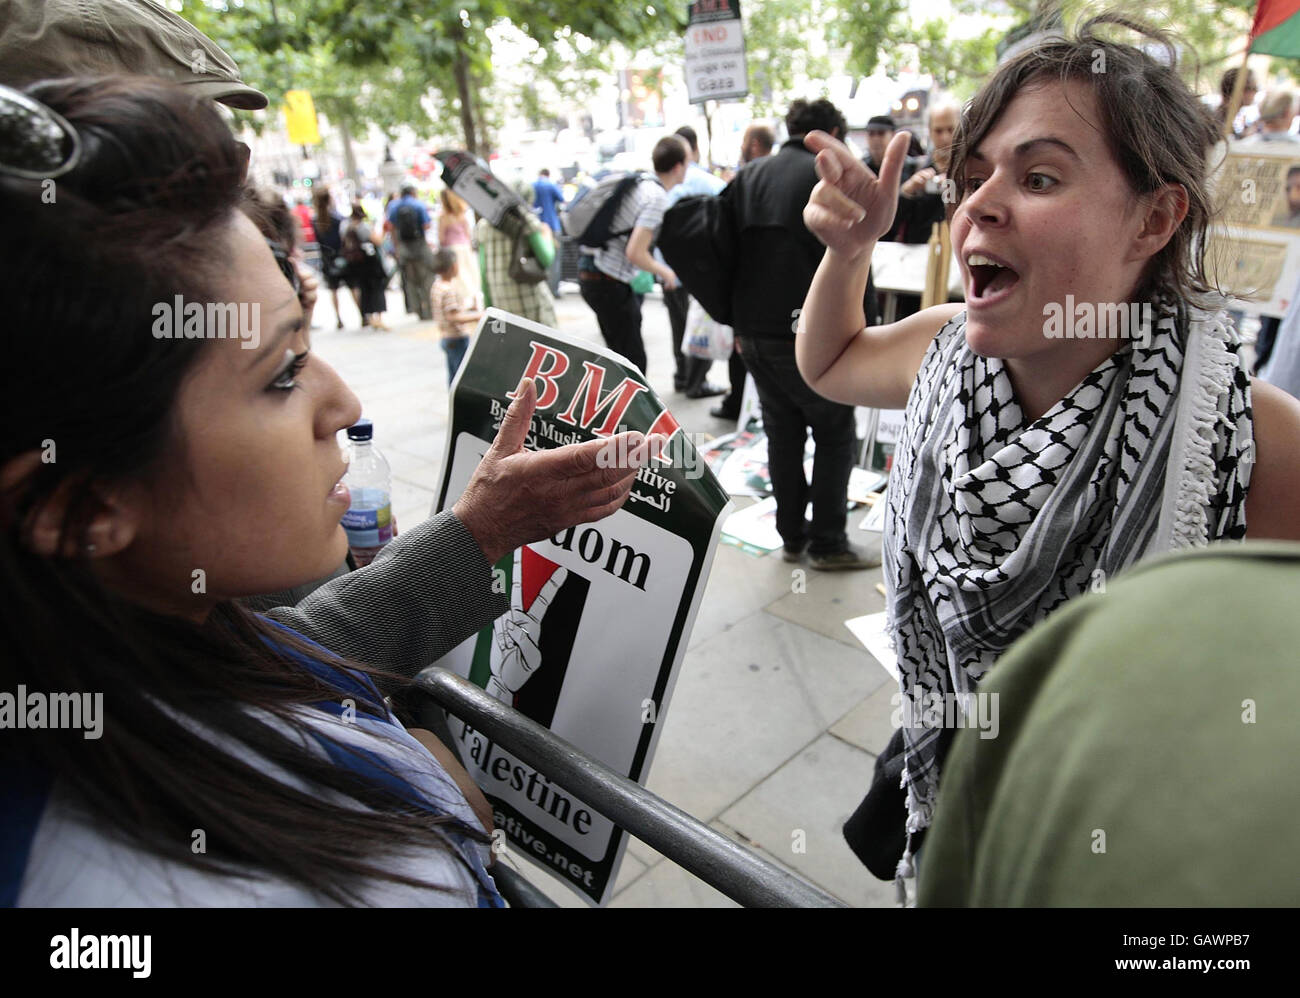 A pro-Palestine demonstrator (right) argues with a Jewish woman (left) during a protest coinciding with the Salute to Israel Parade in Trafalgar square, London, UK. Stock Photo